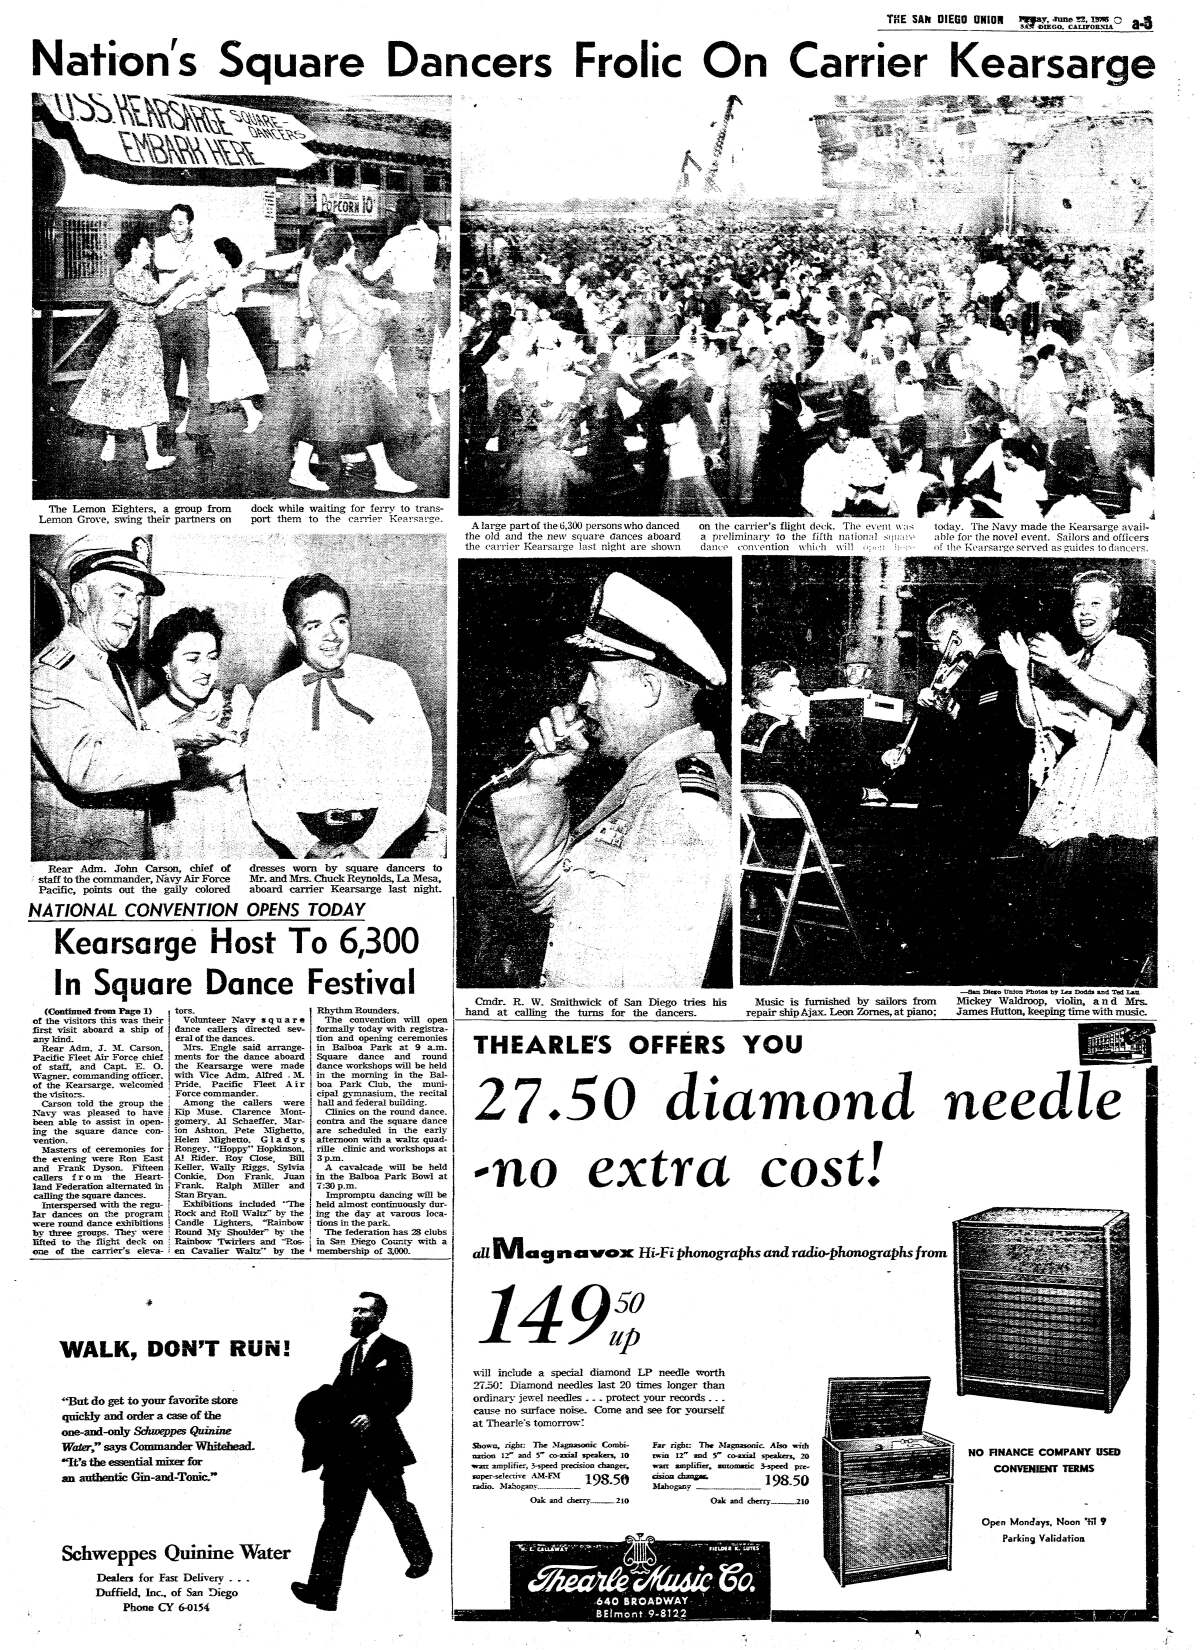 June 22, 1956 page from The San Diego Union features photos of square dancers on the carrier Kearsarge.